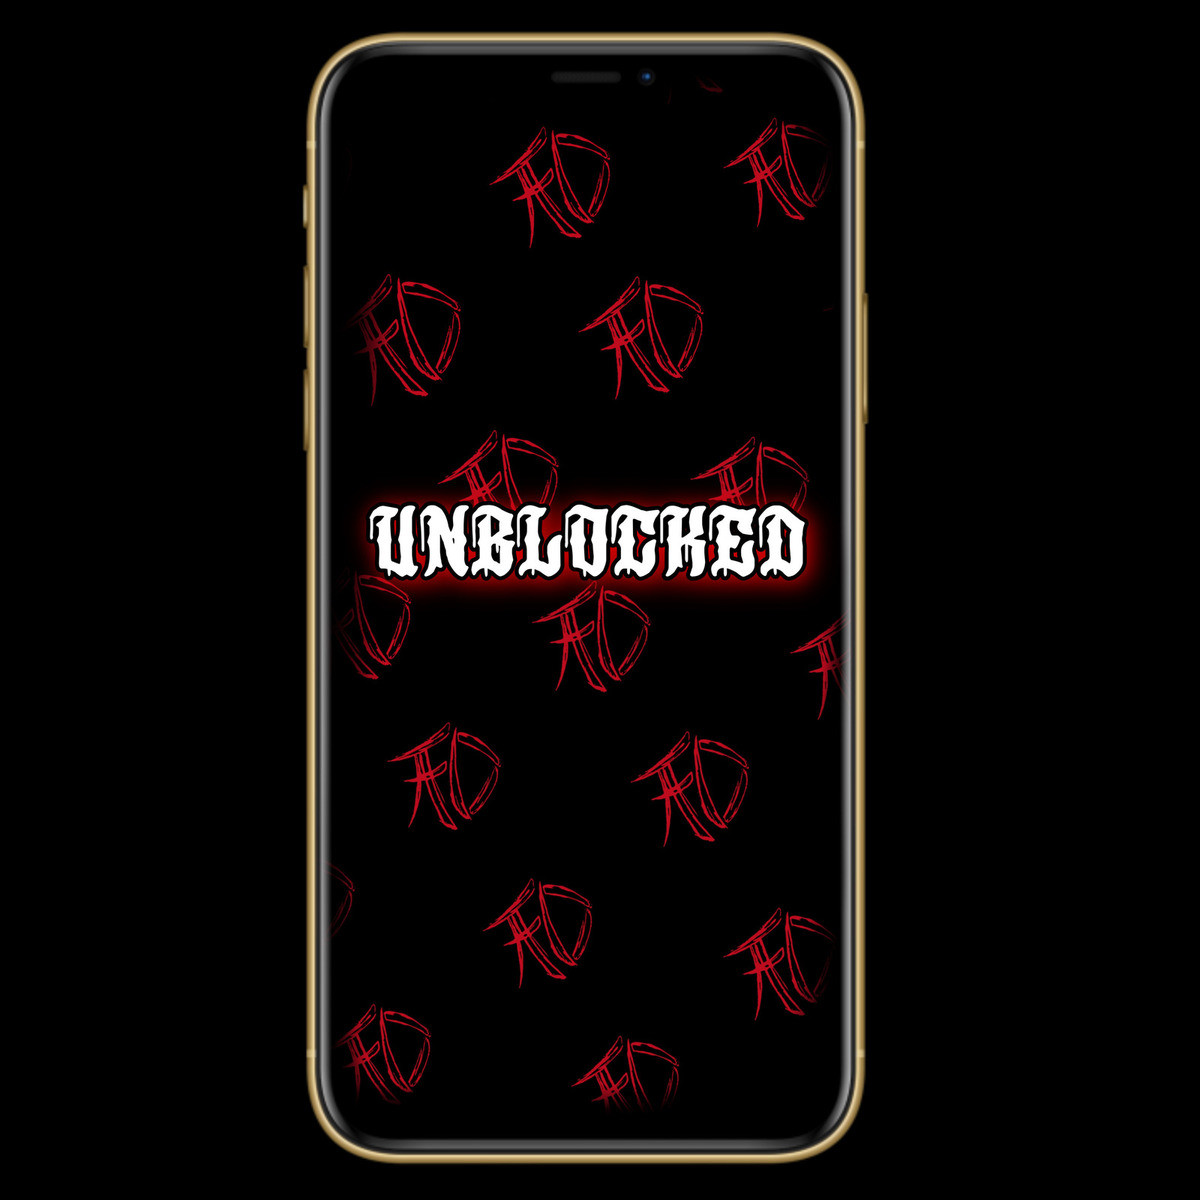 mp3 song download unblocked